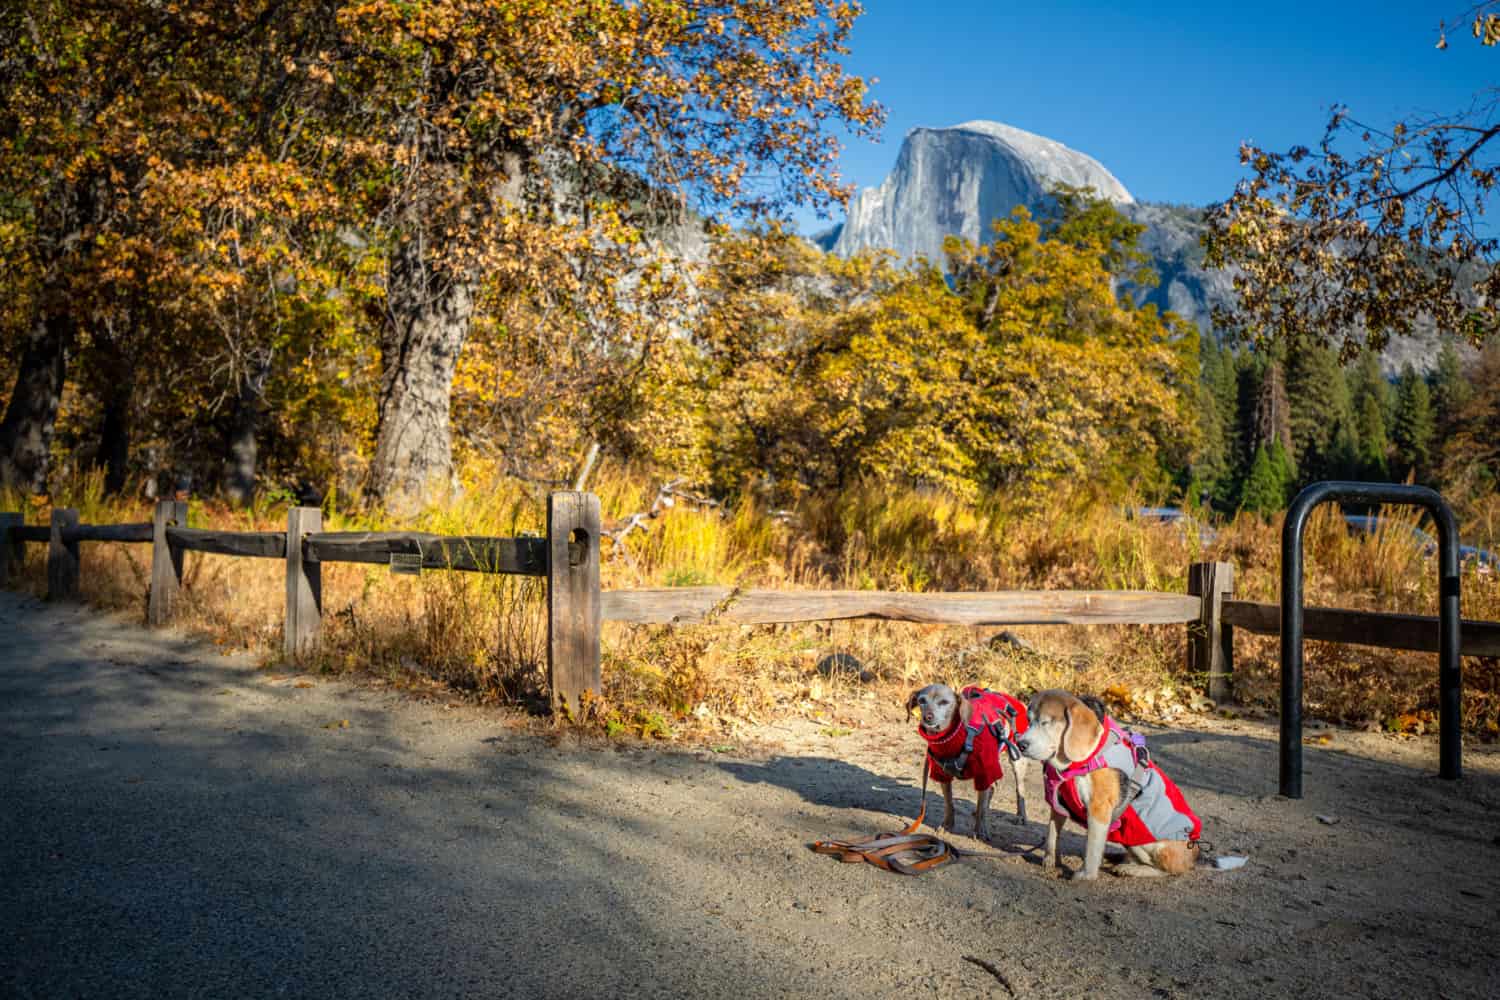 Two beagles posing on a pet friendly trail in a national park surrounded by autumn colors